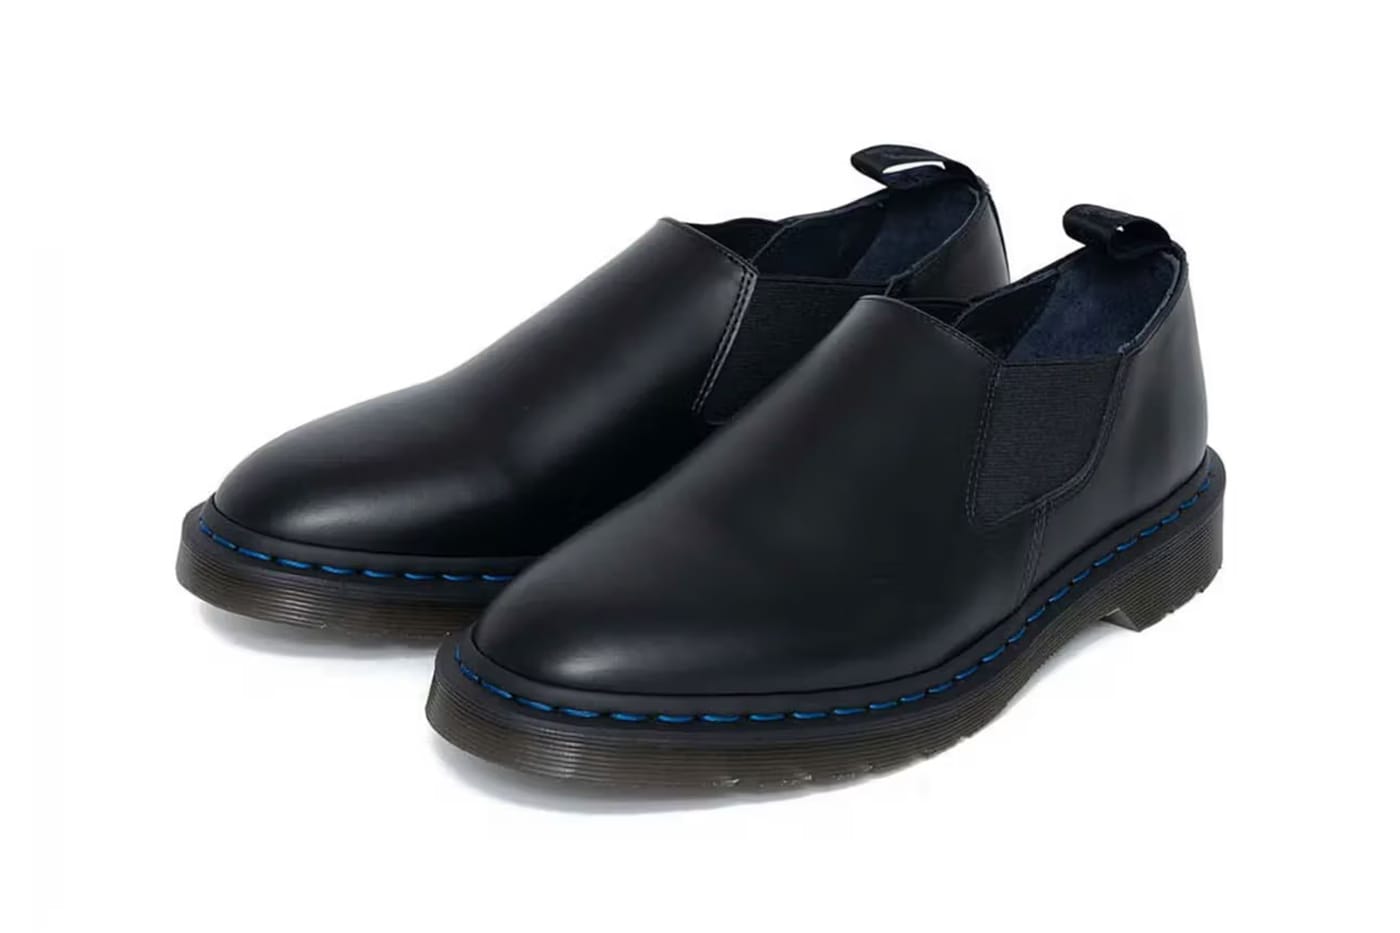 nanamica x Dr. Martens New Collaboration | Hypebeast